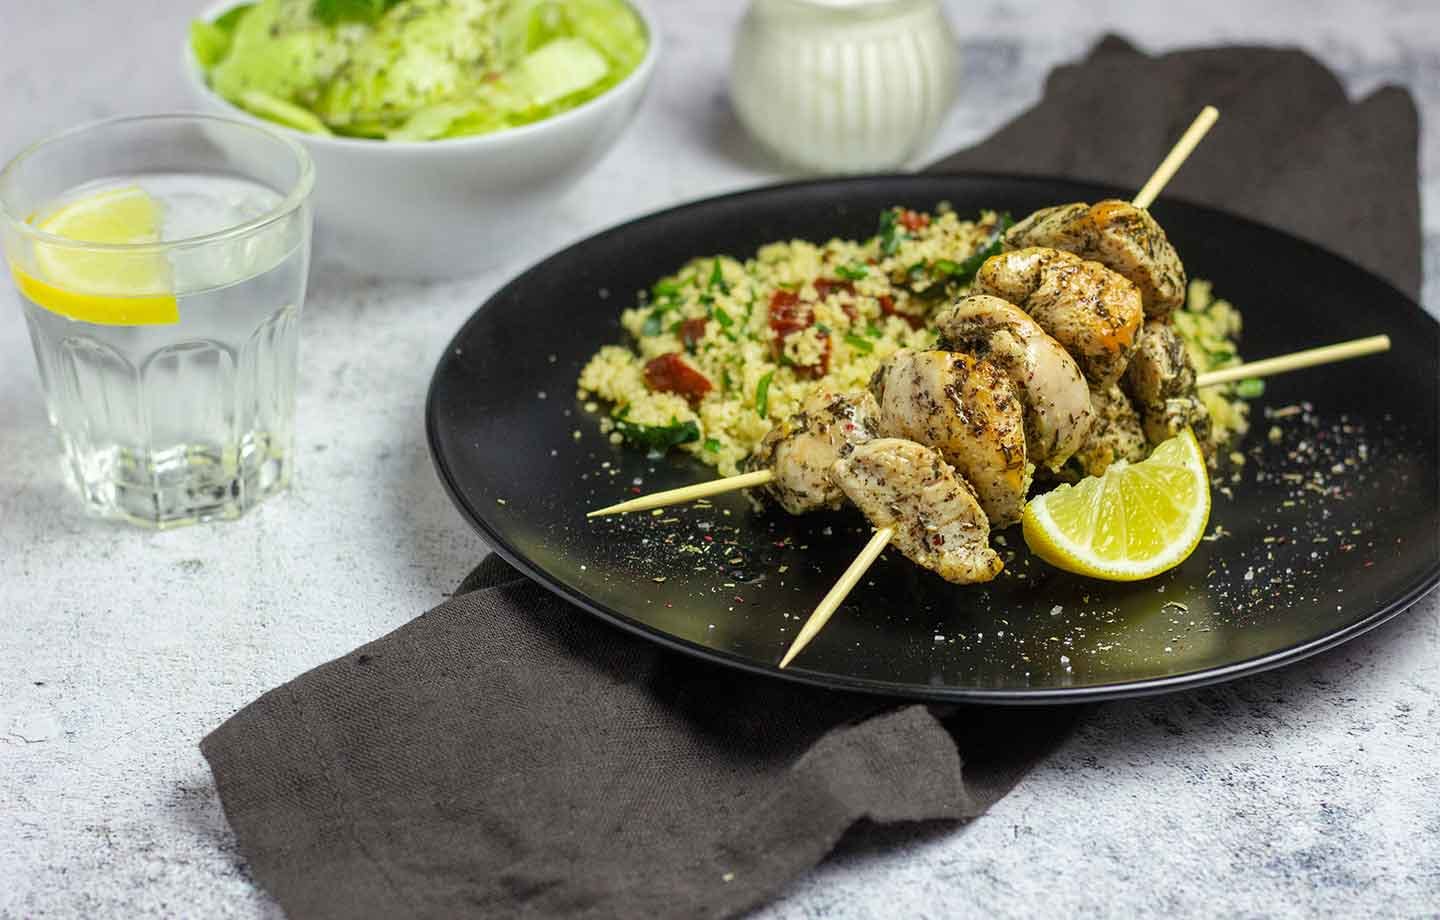 Delicious chicken skewers spices with our organic herbs.